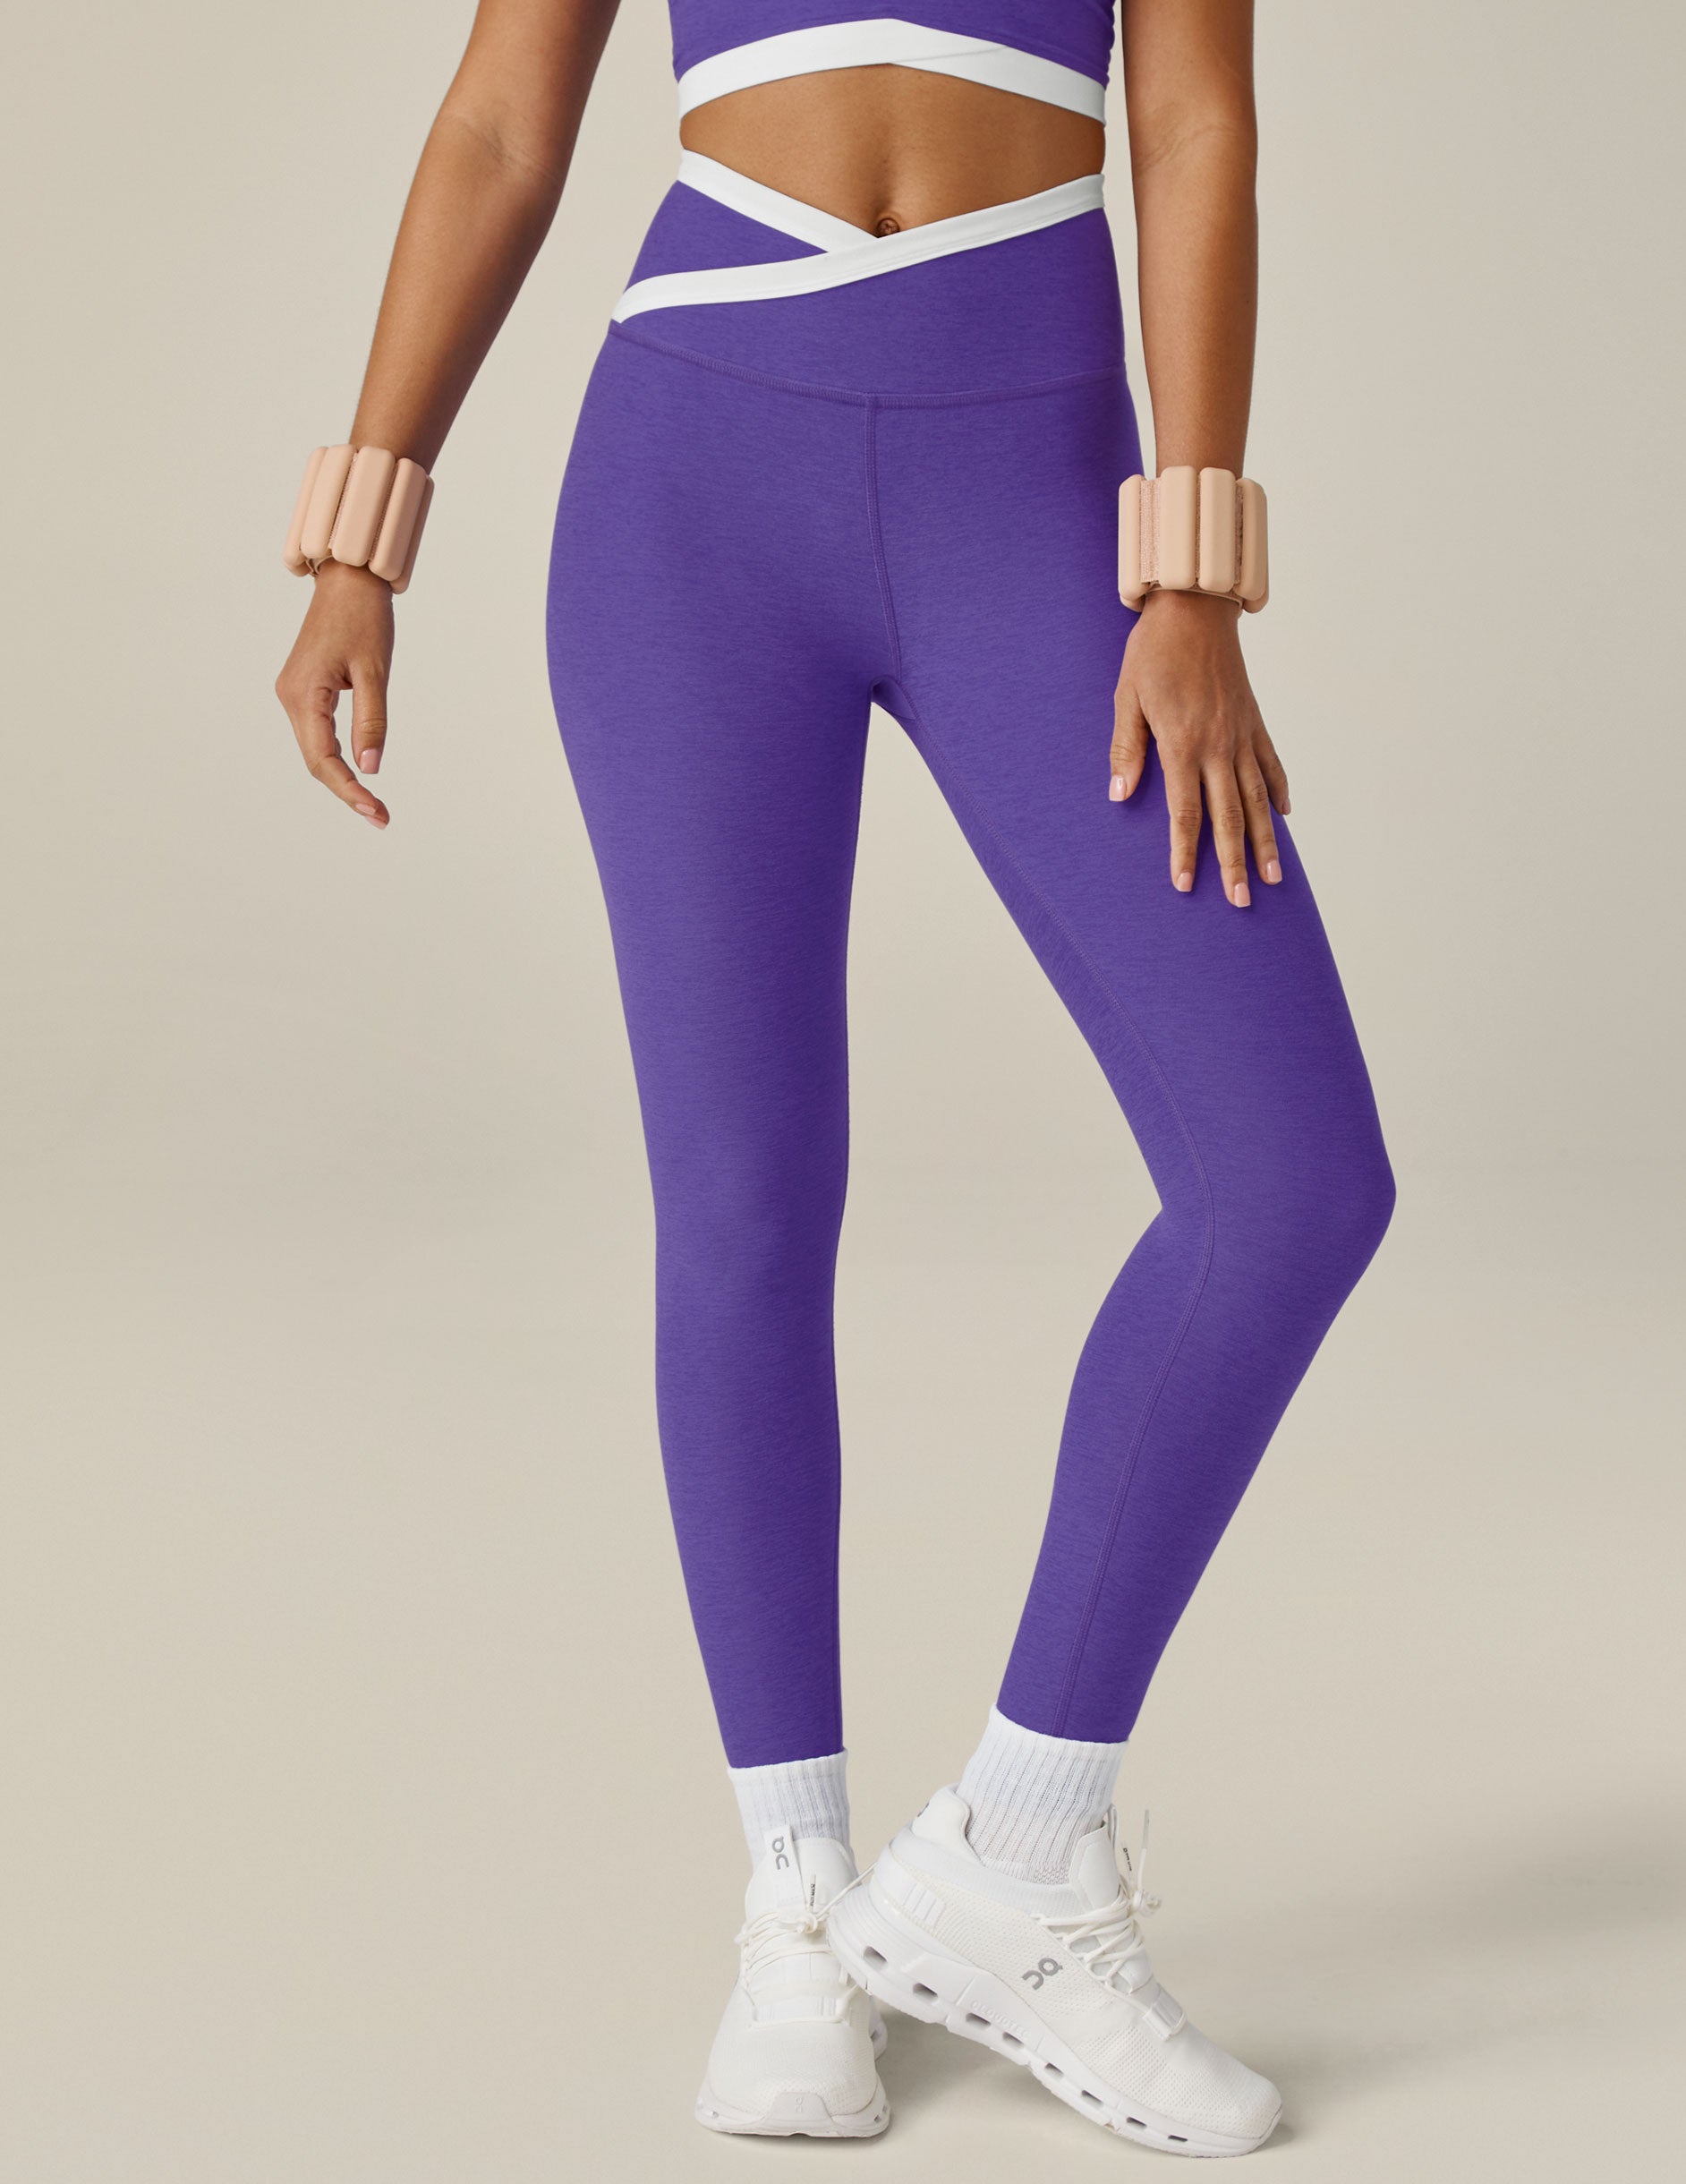 Urban Outfitters Beyond Yoga Outline Spacedye Legging